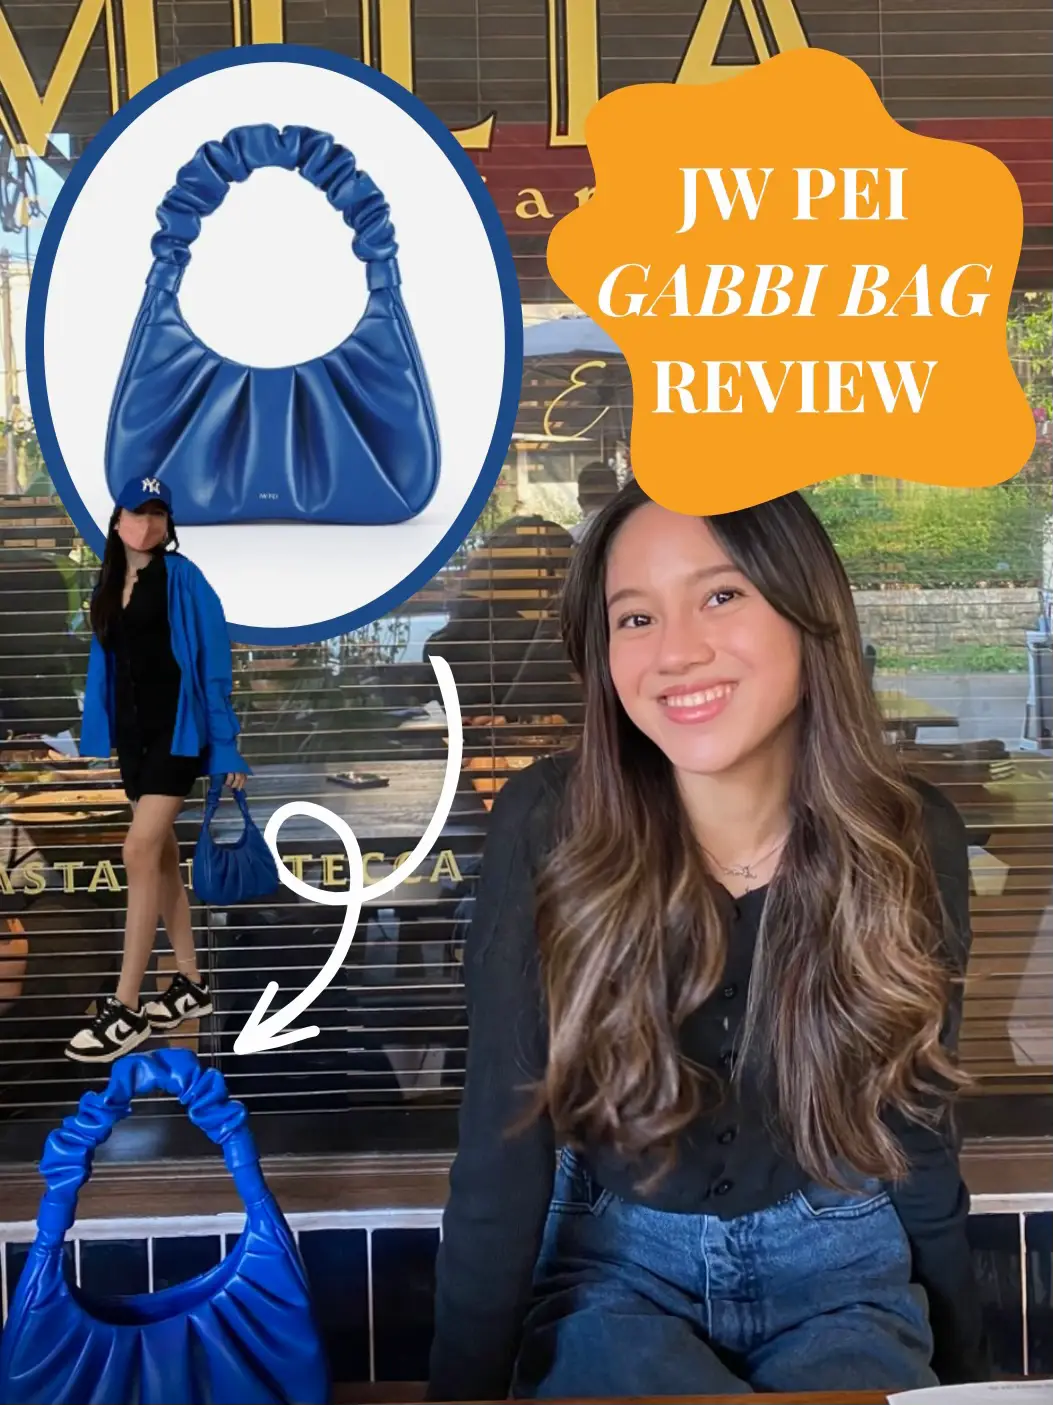 Jw Pei Gabbi Bag Review, Gallery posted by Nadia Annisa